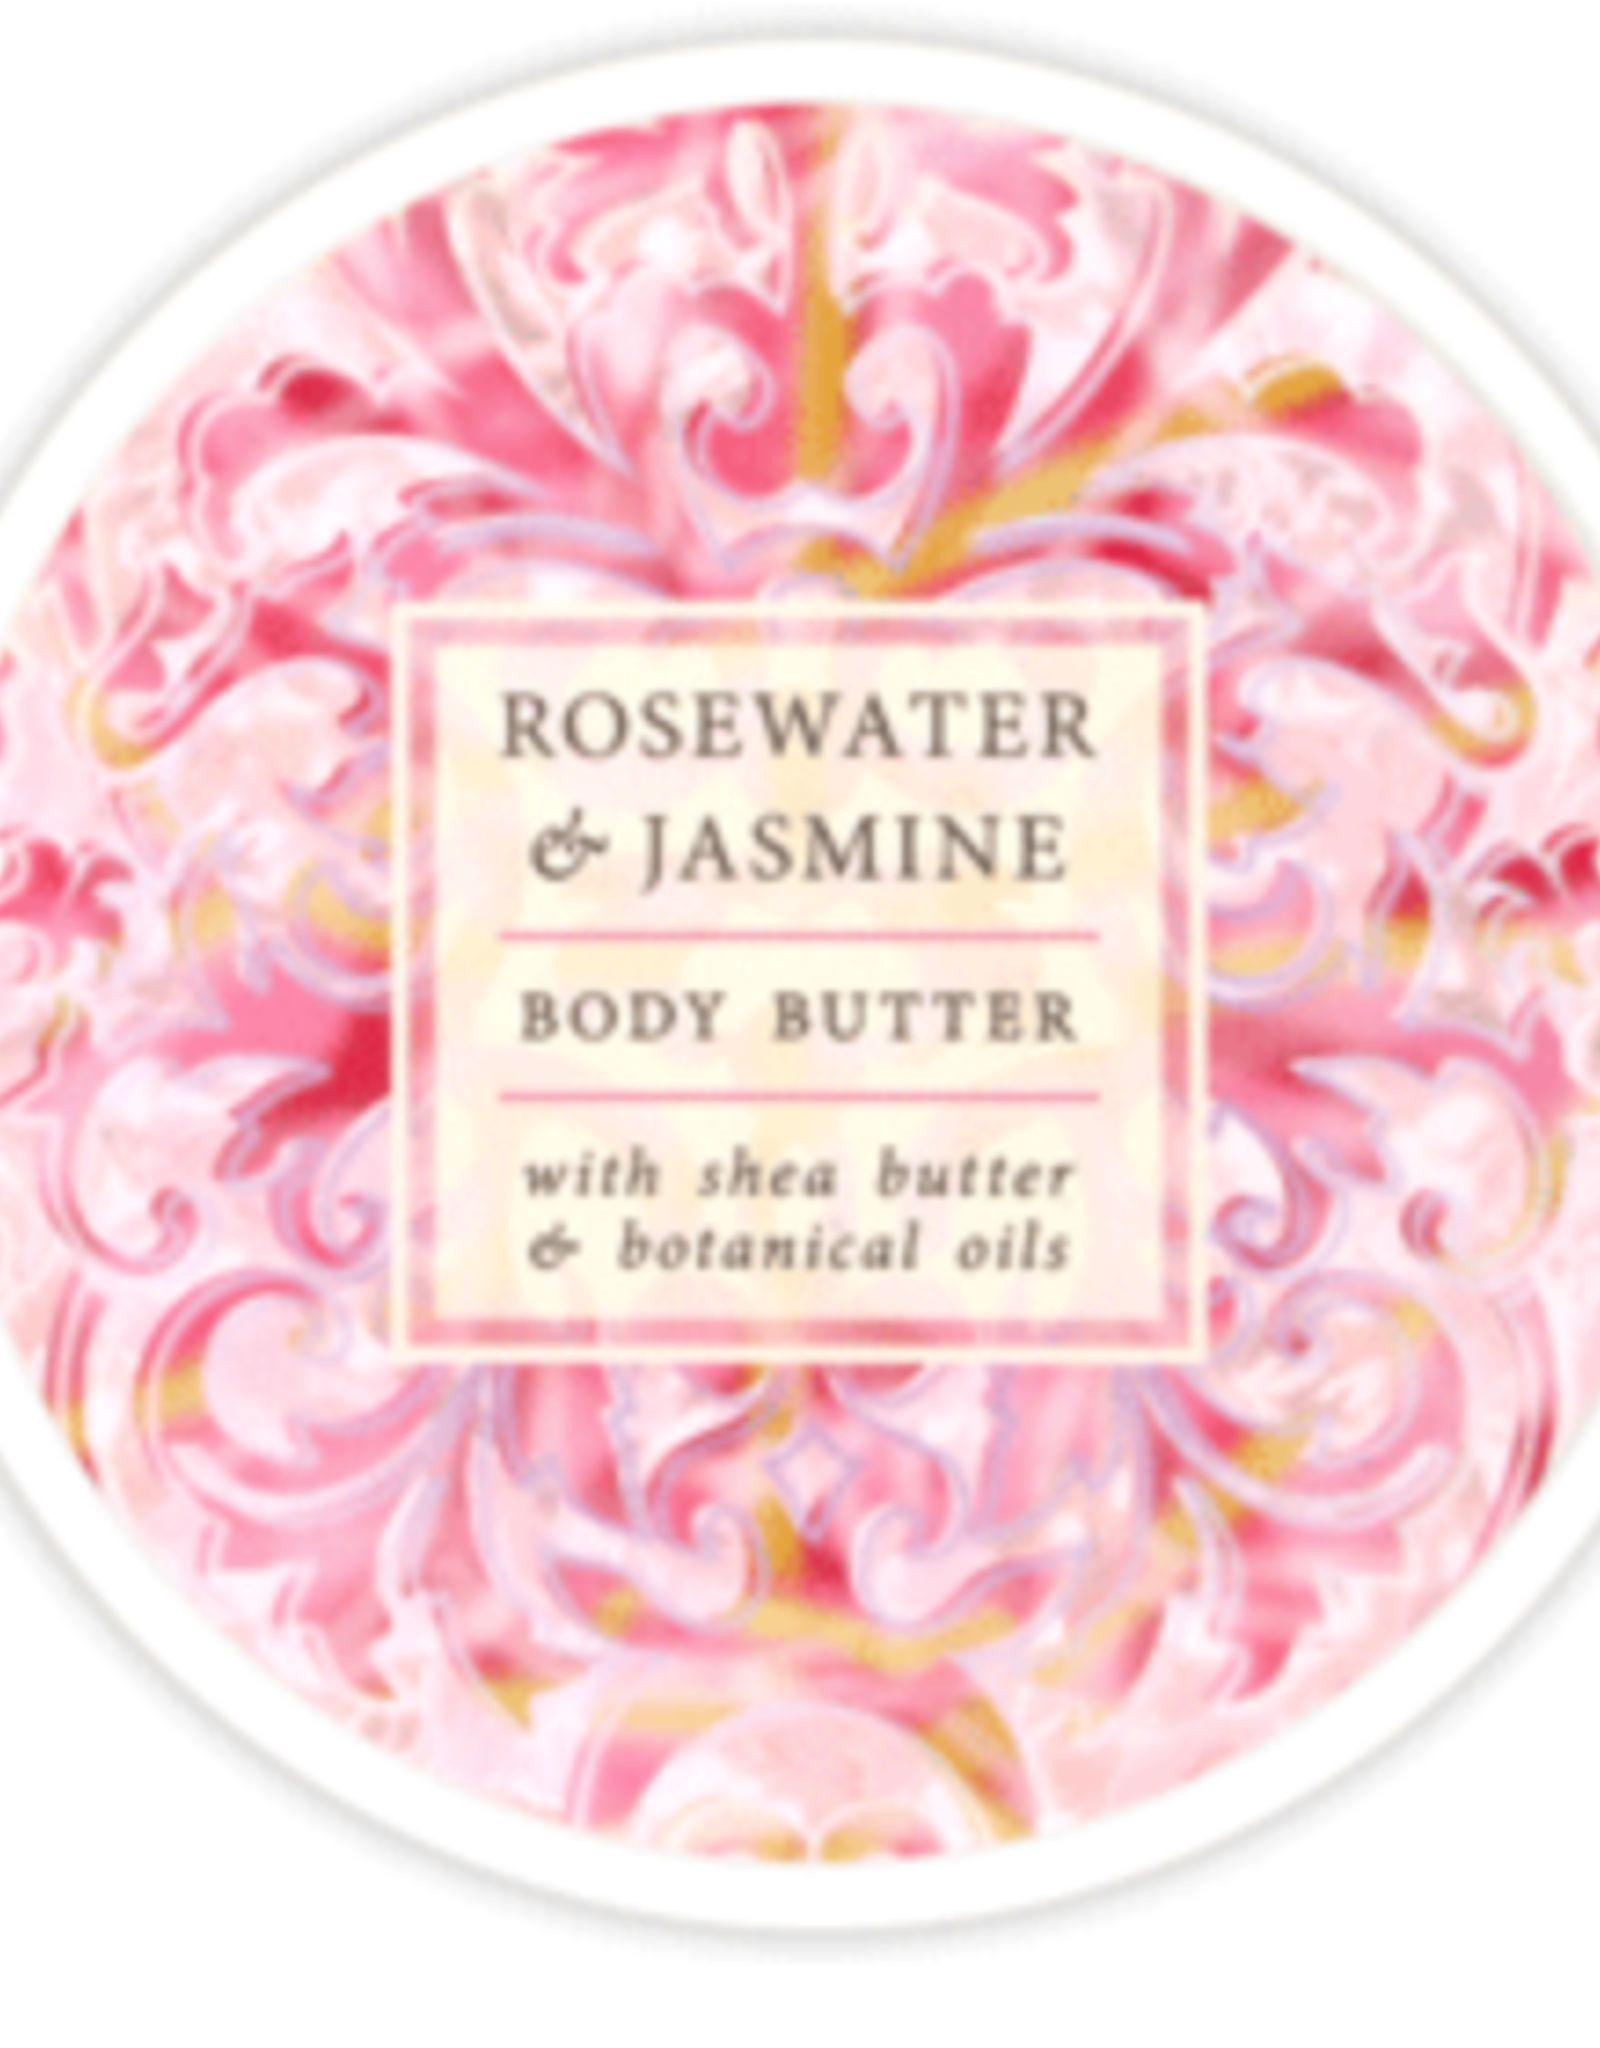 Rosewater and Jasmine - Greenwich Bay - Body Butter